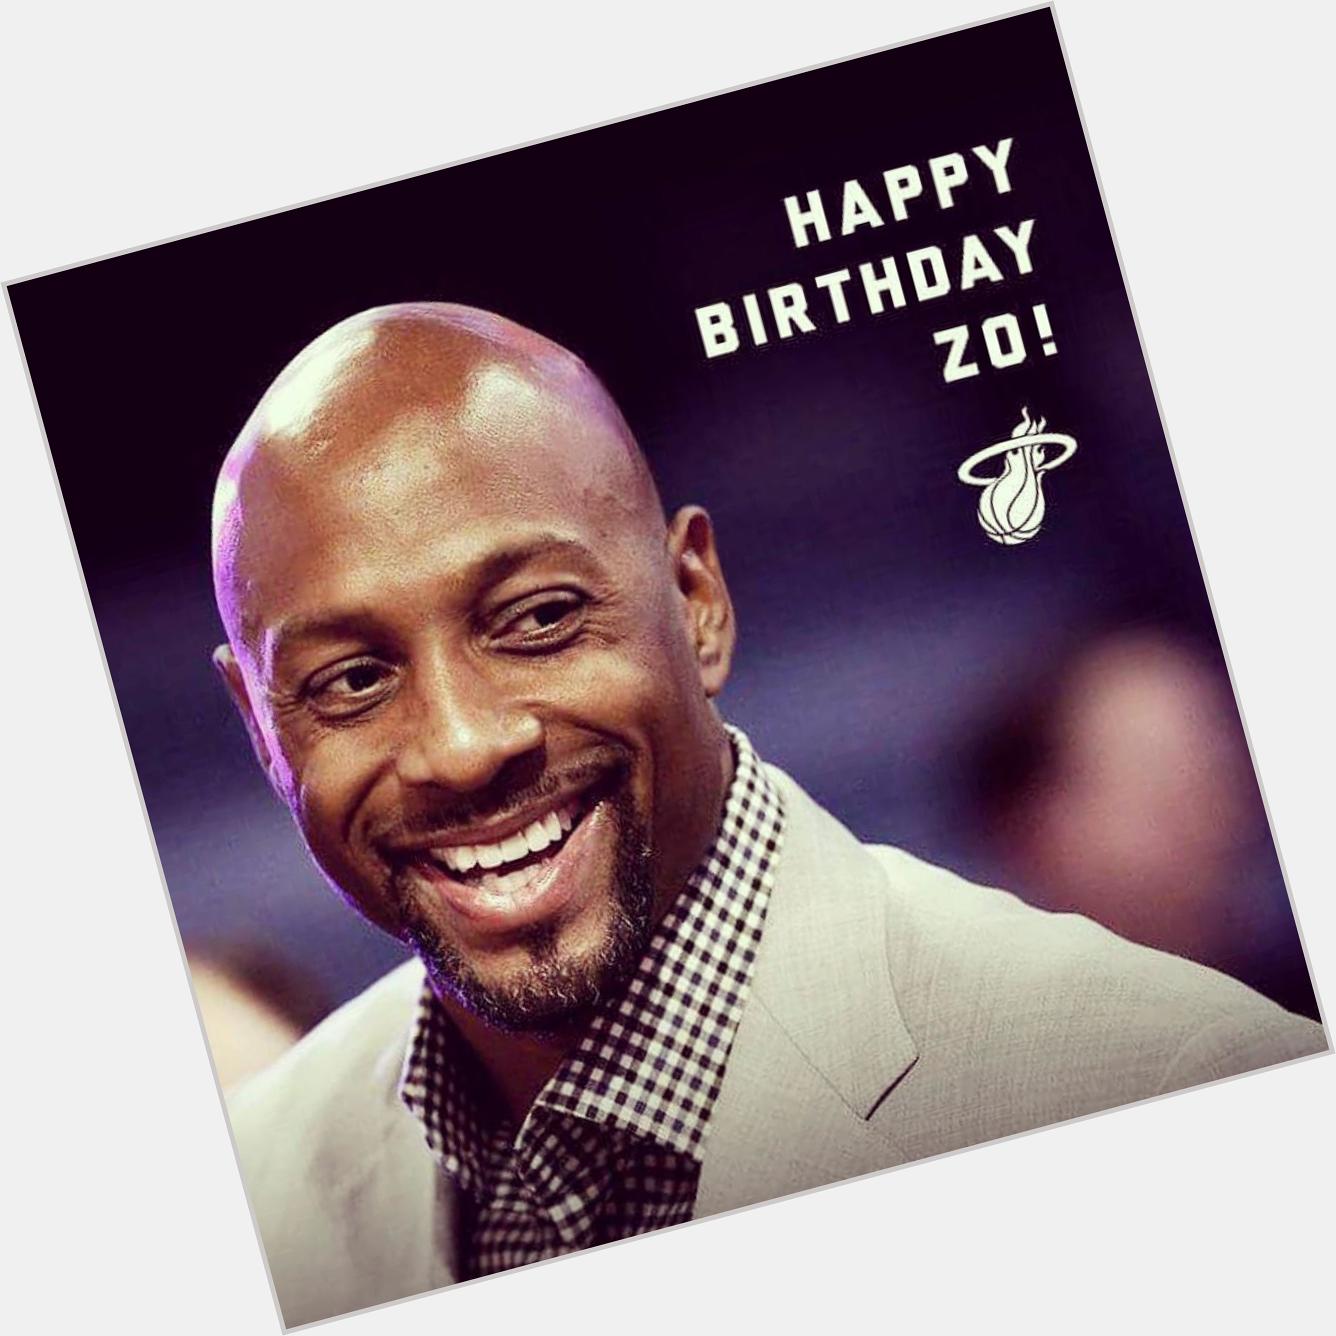 Happy birthday to the warrior, the great Alonzo mourning 